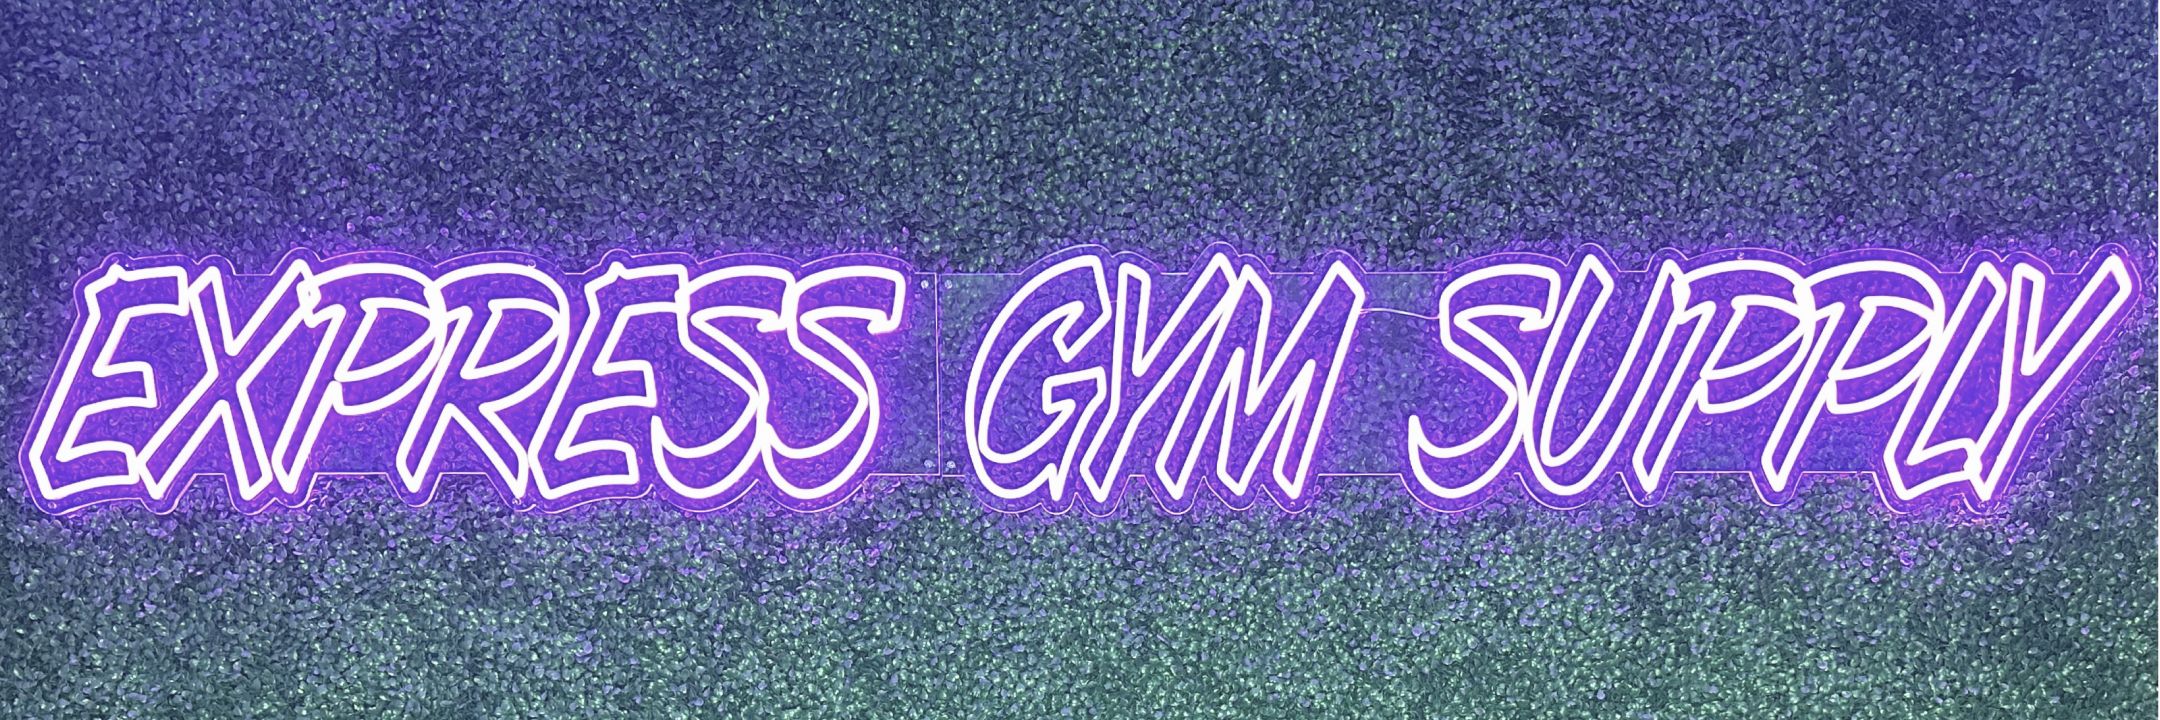 Learn more about Express Gym Supply